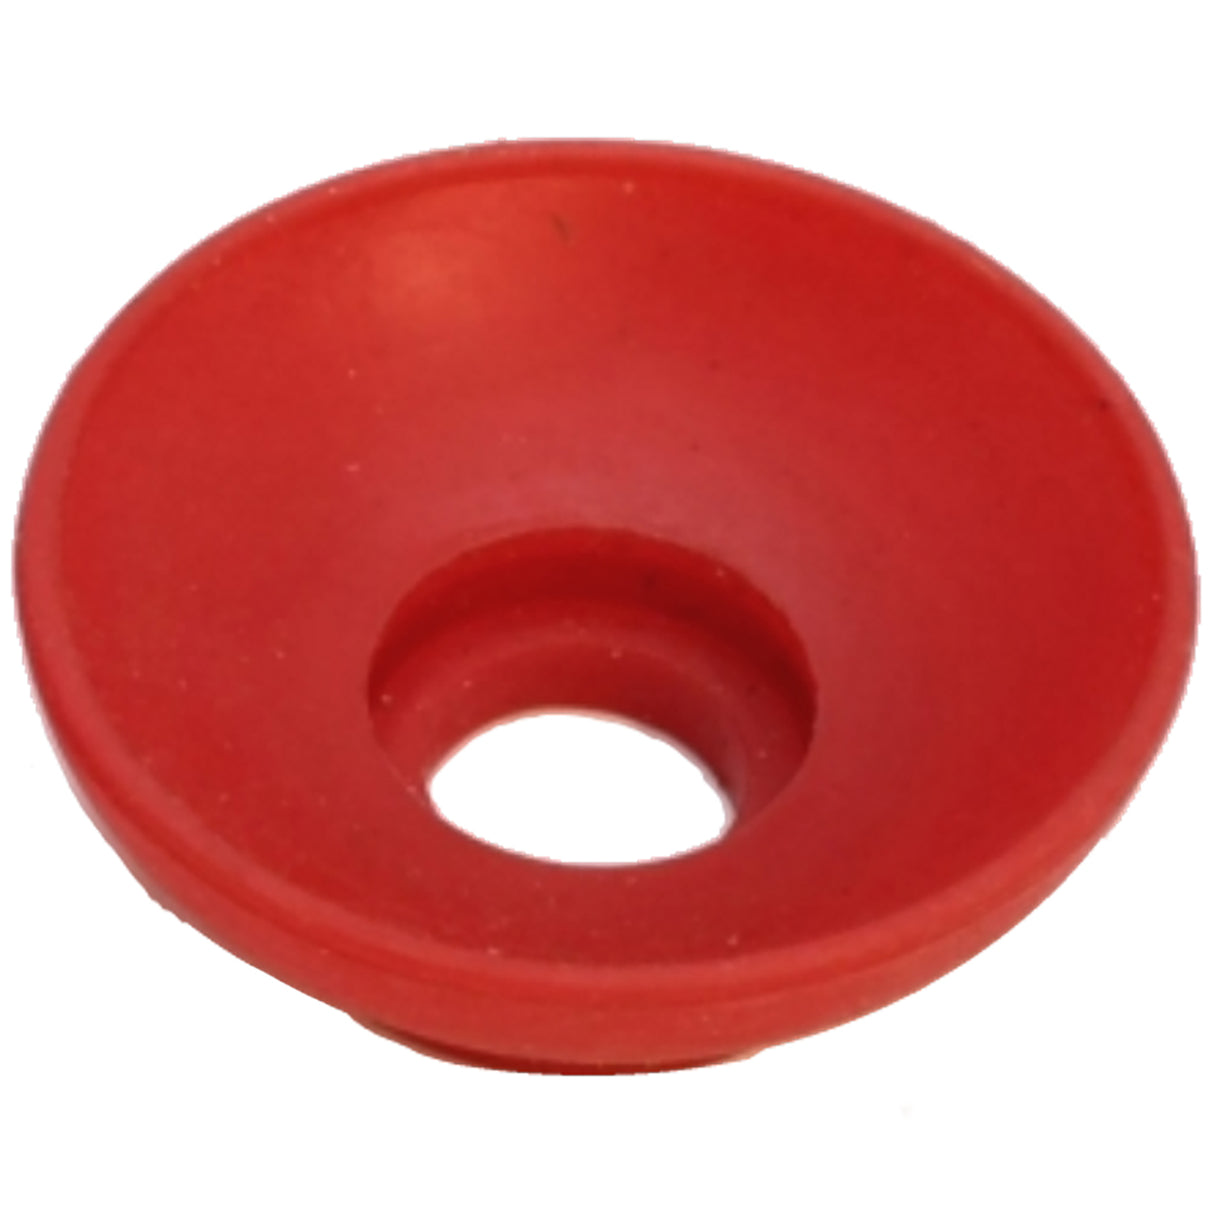 Jettercap Silicone Lely